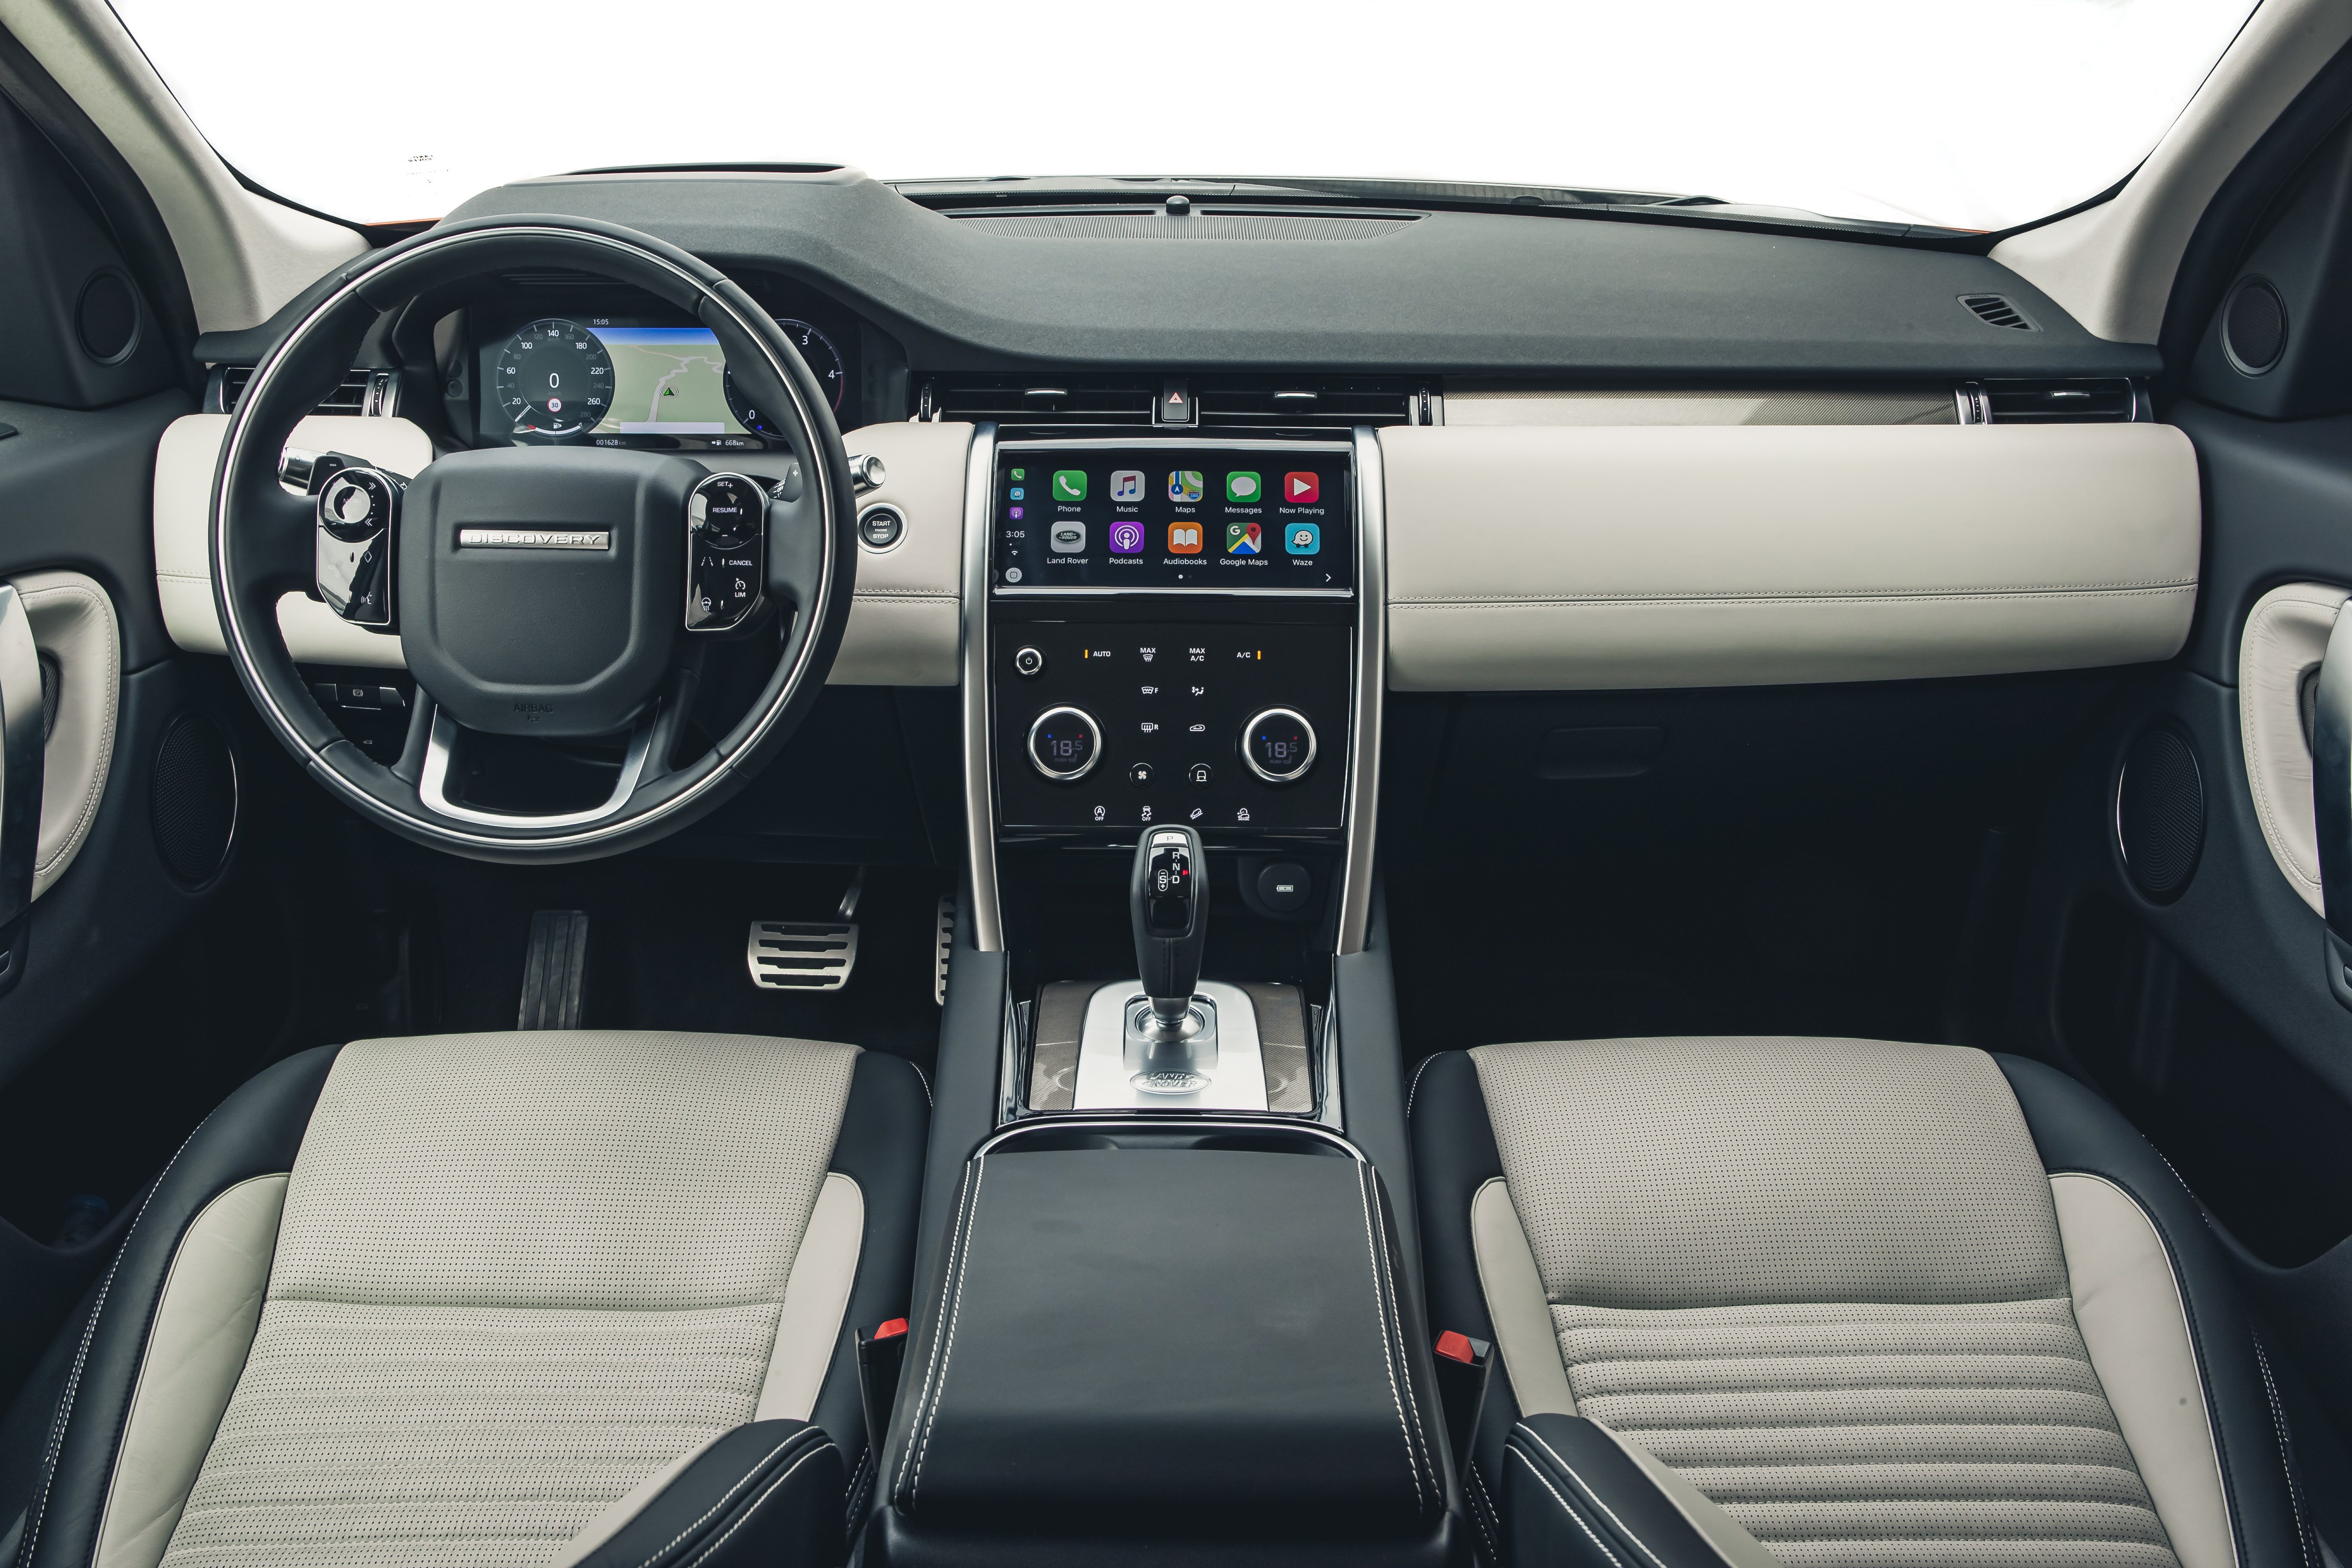 Rover sport салон. Land Rover Discovery Sport Interior. Land Rover Discovery Sport 2022 Interior. Land Rover Discovery Sport 2020. Land Rover Discovery Sport 2022 салон.